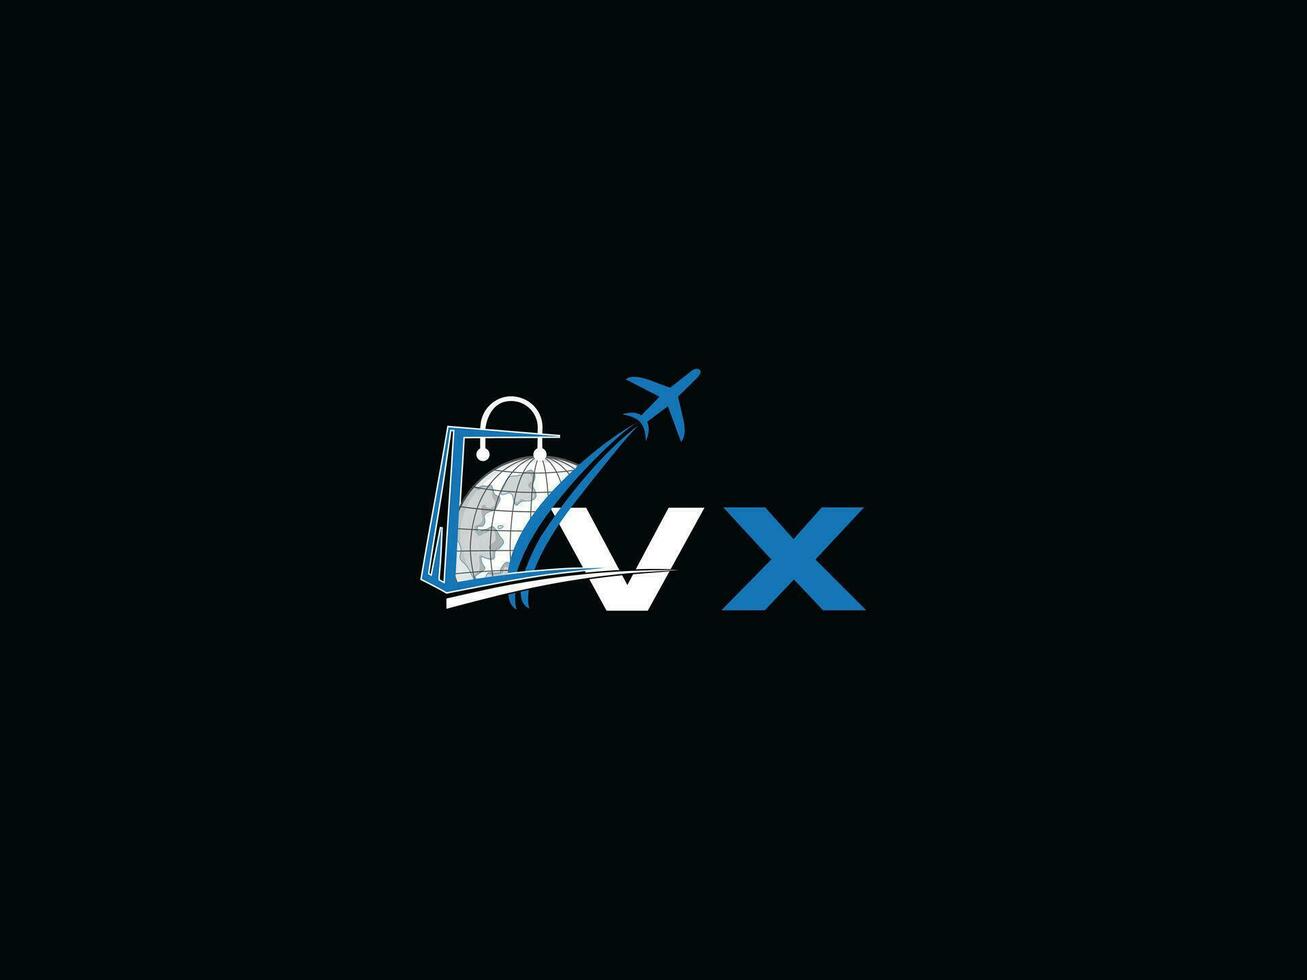 Simple Air Vx Travel Logo Icon, Initial Global VX Logo For Travel Agency vector